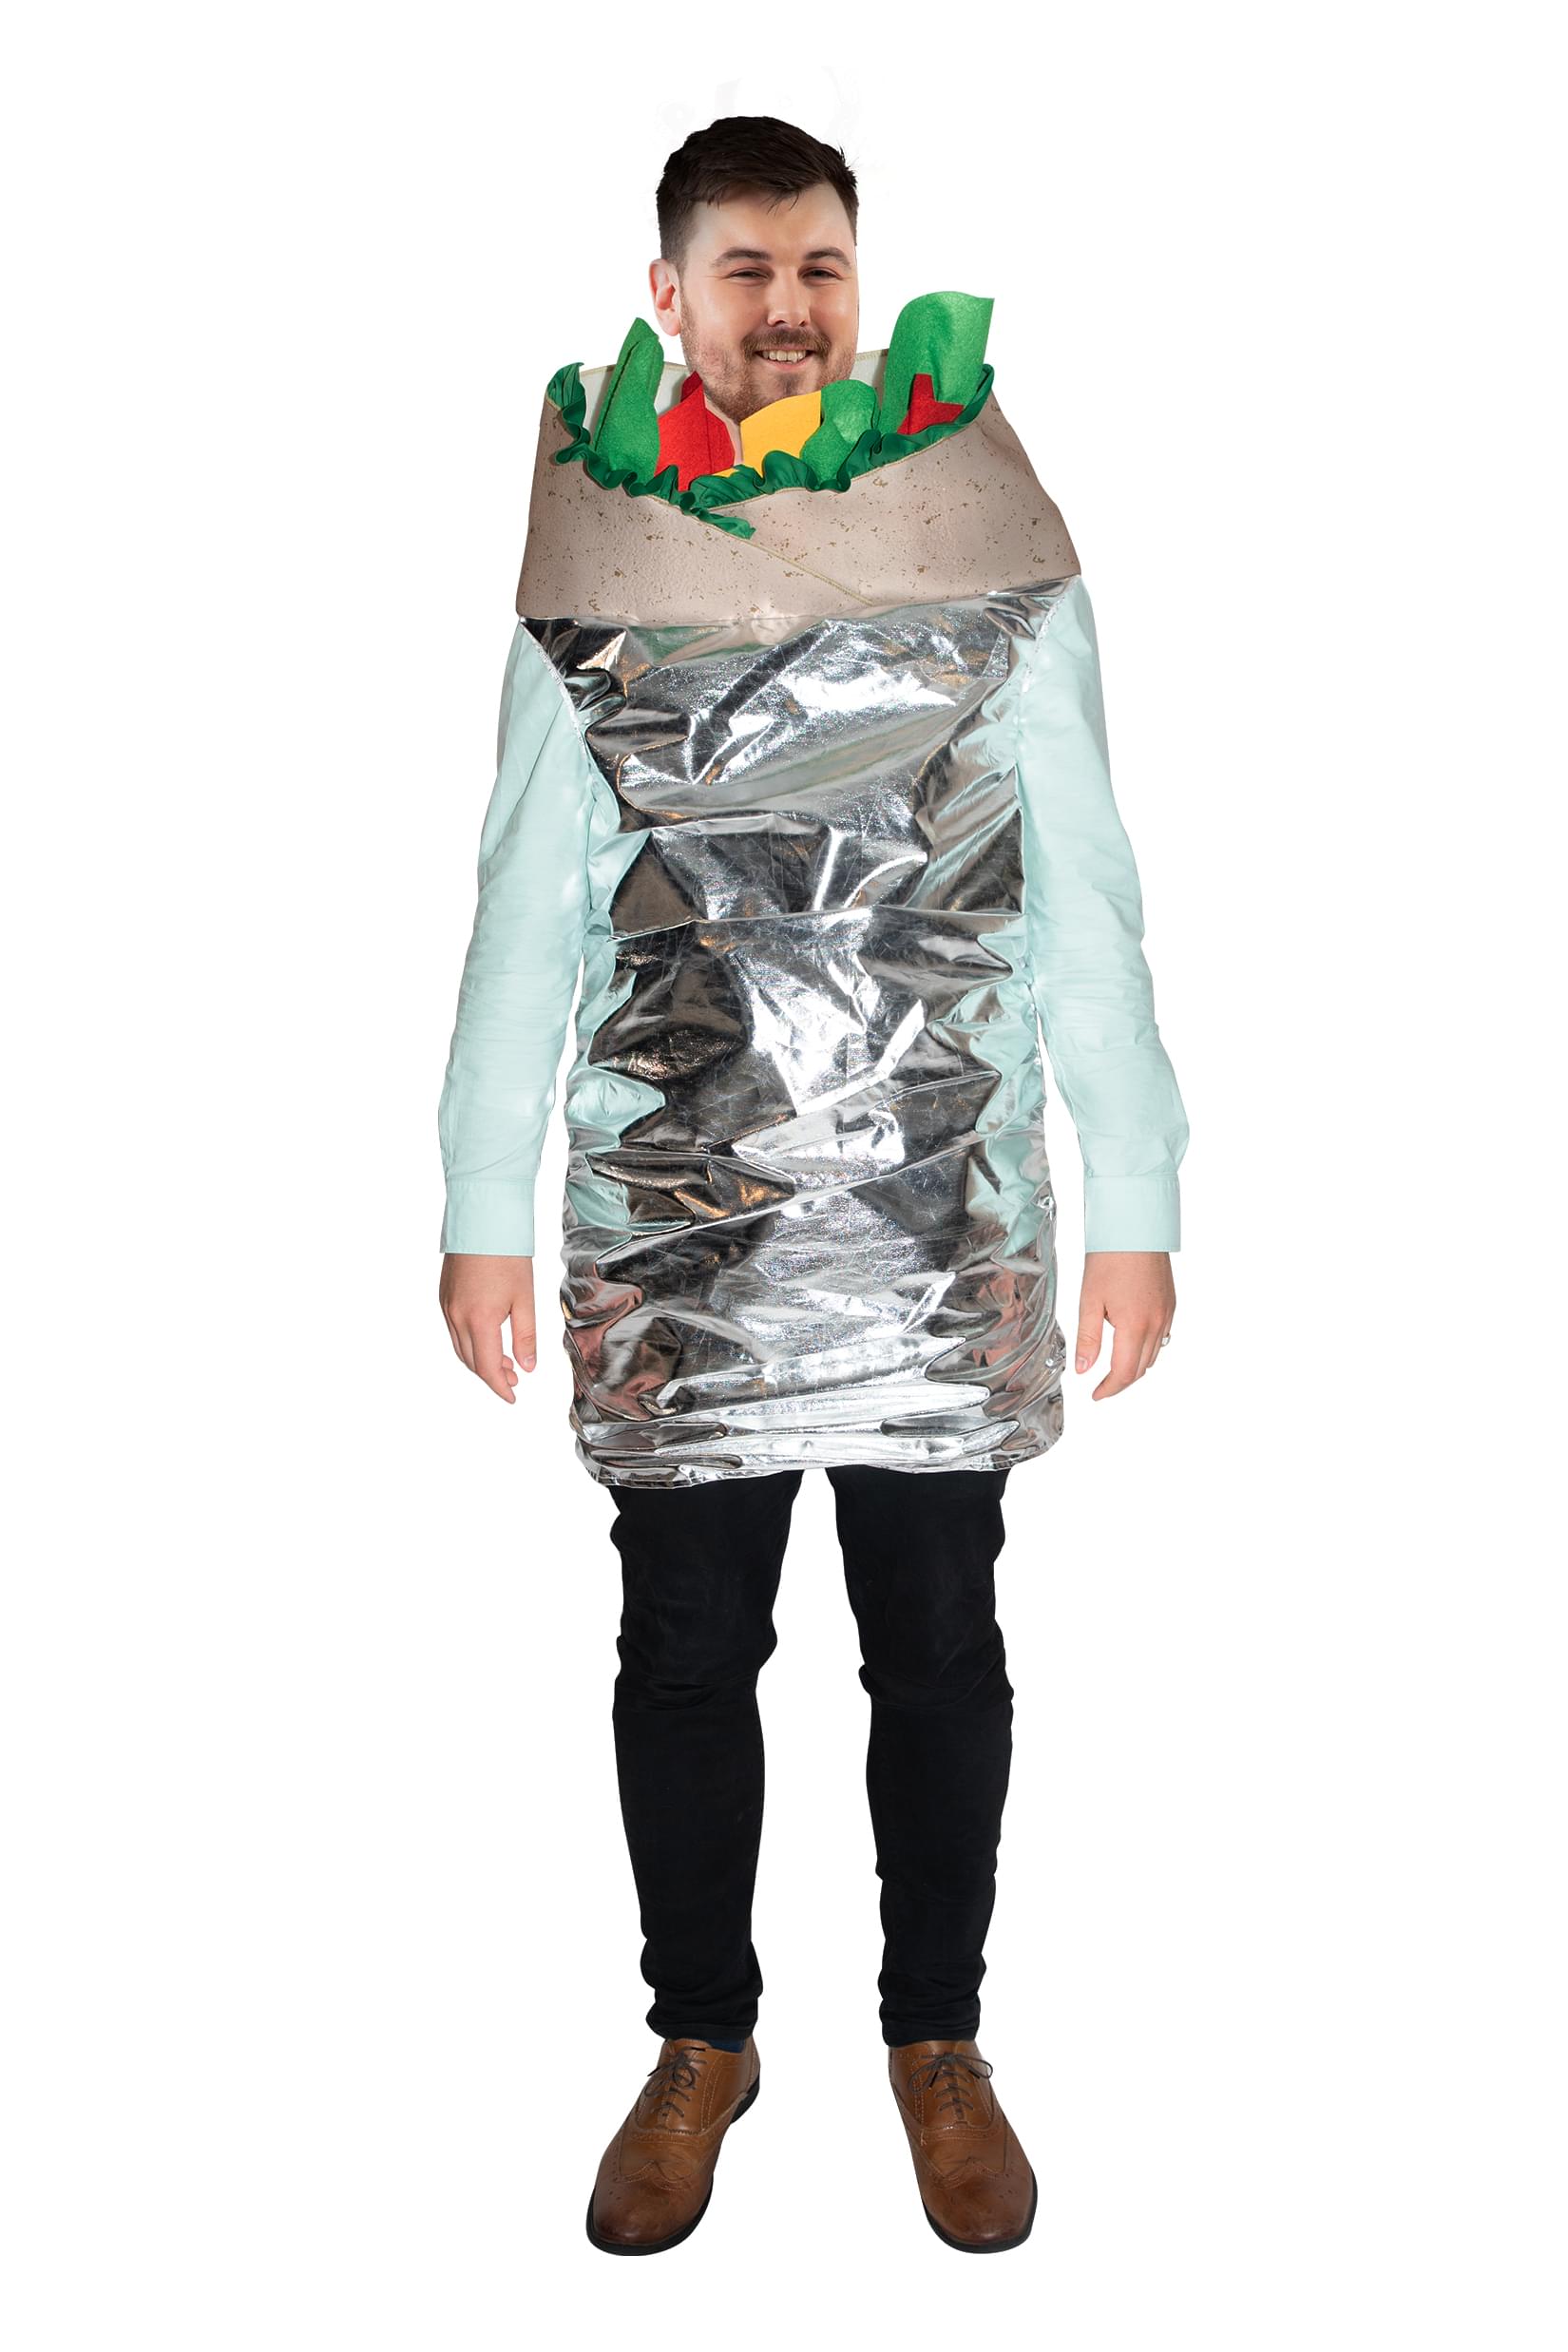 Burrito Costume For Adults | Easy Pull Over Design | Sized To Fit Most Adults